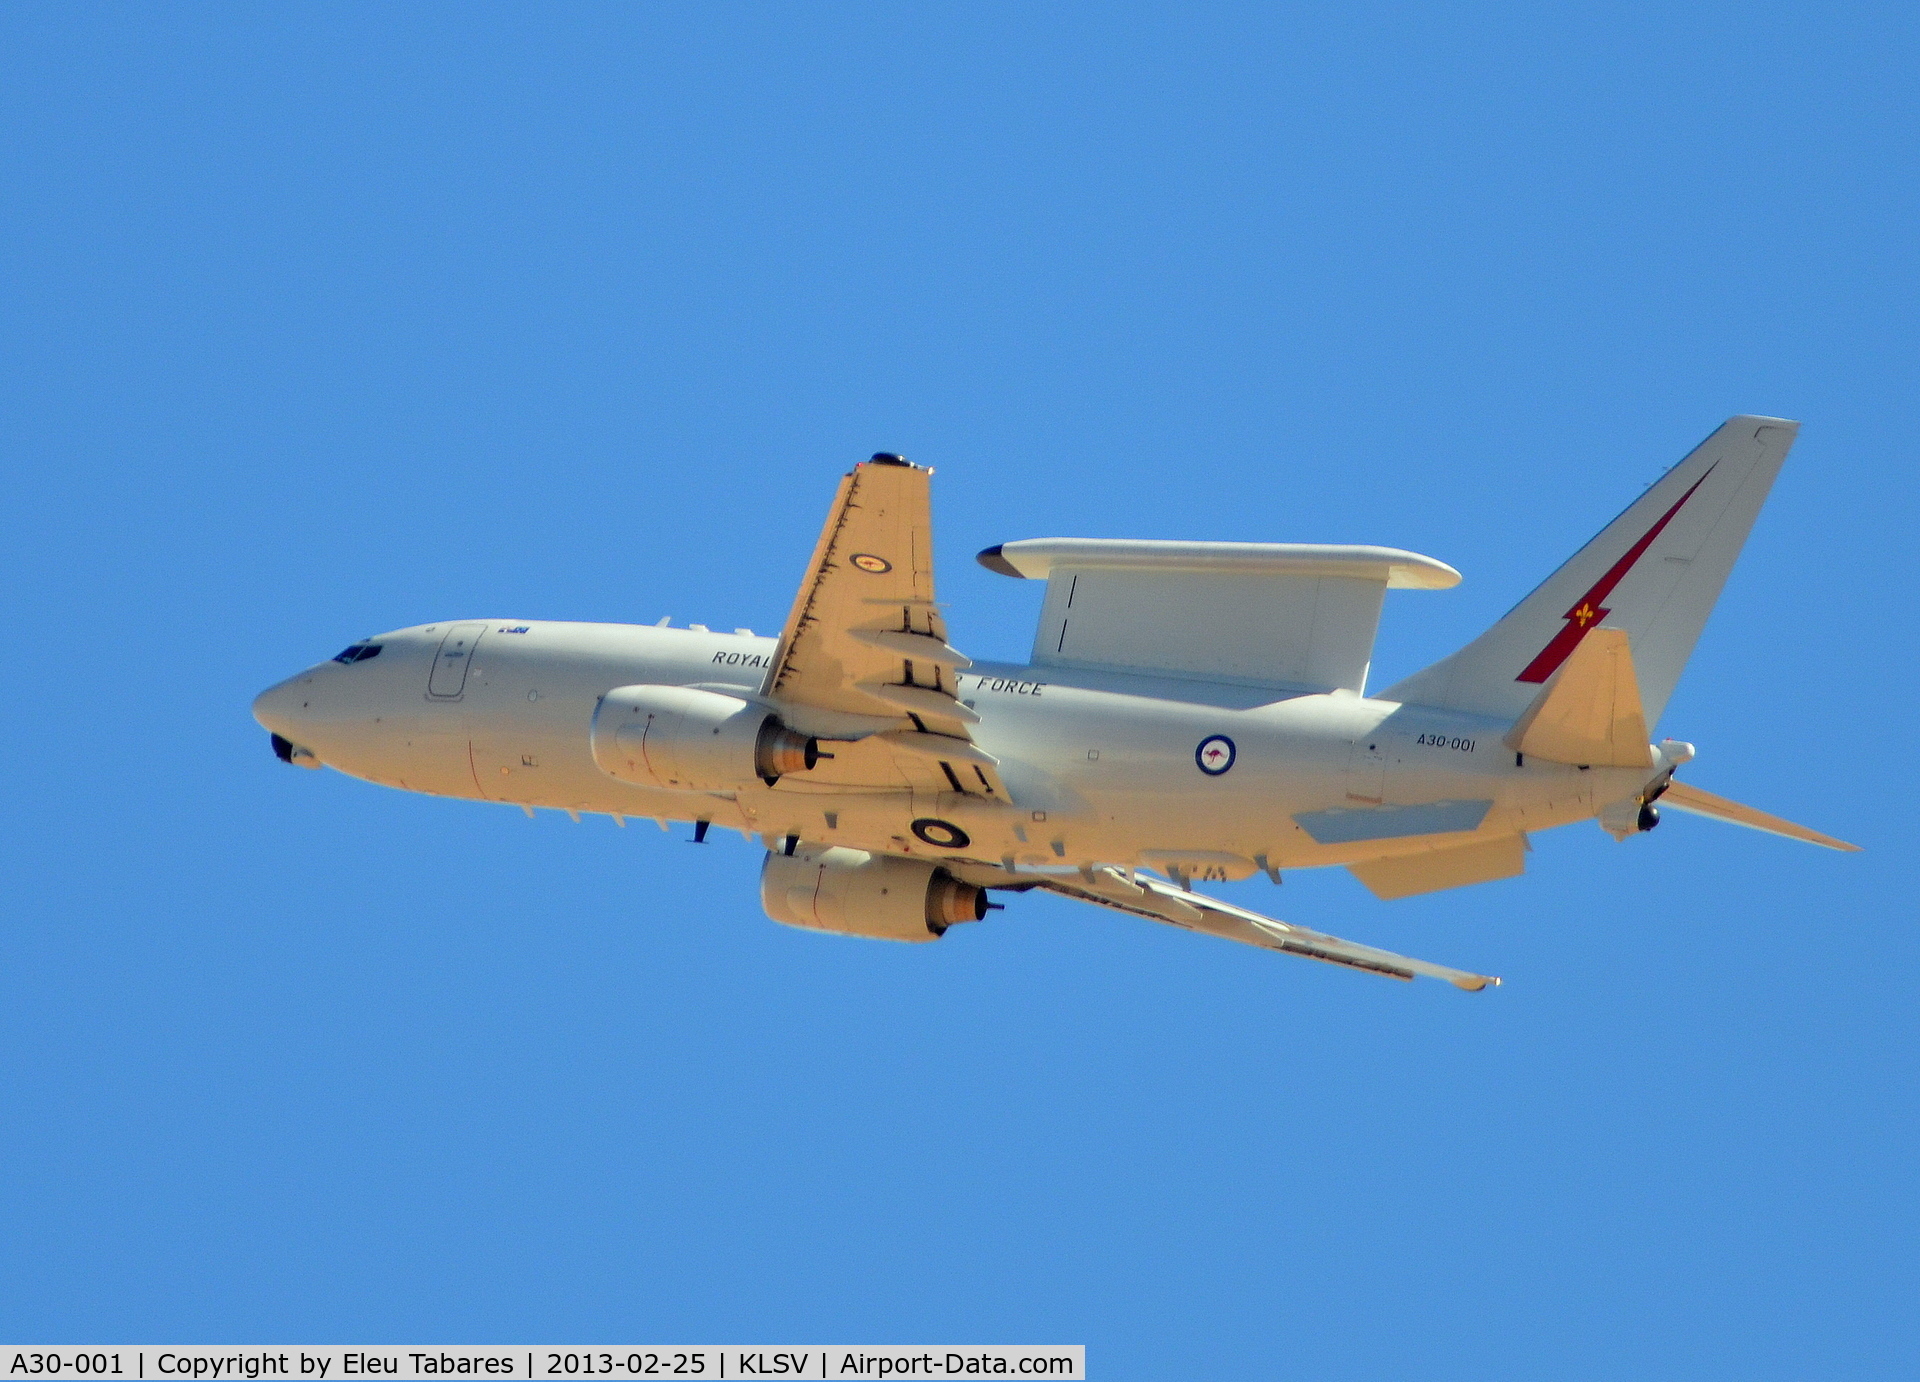 A30-001, 2002 Boeing E-7A Wedgetail C/N 33474, Taken during Red Flag Exercise at Nellis Air Force Base, Nevada.